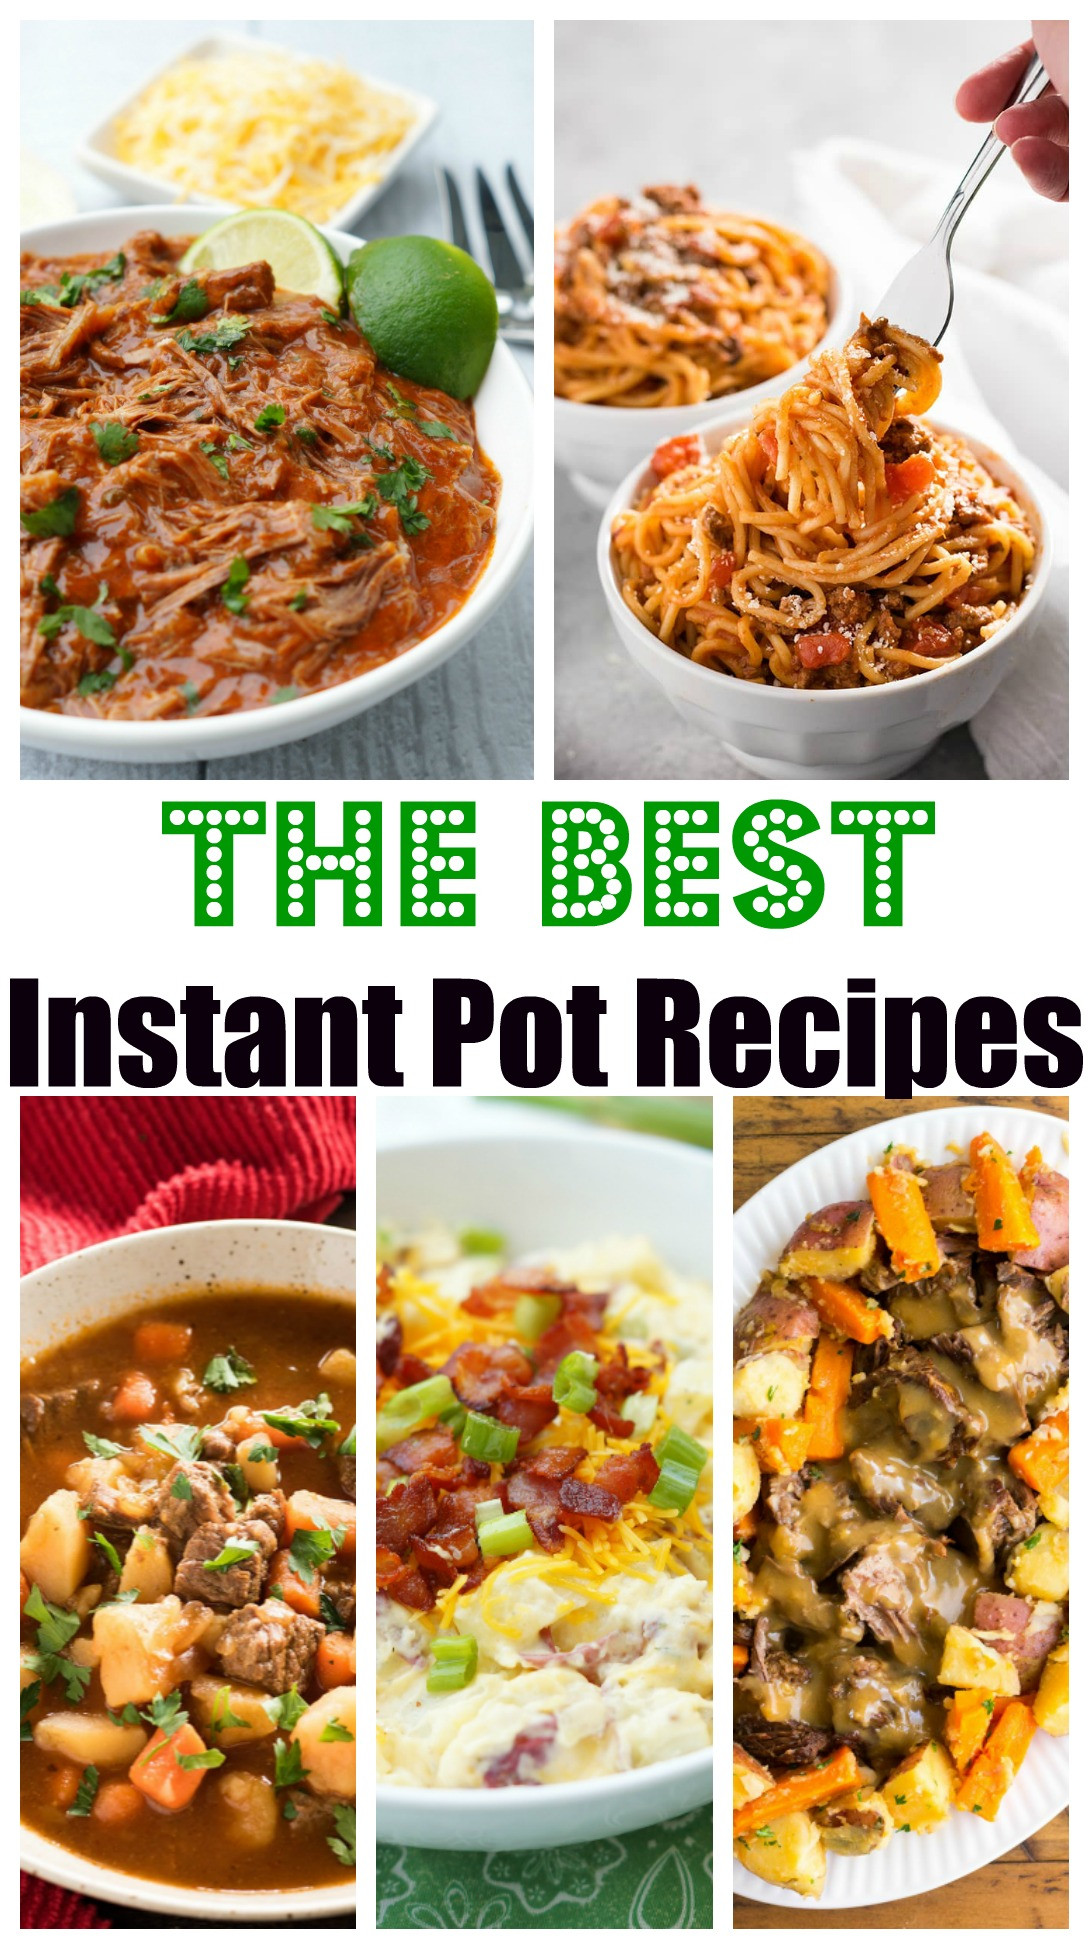 25 Ideas for Instant Pot Favorite Recipes - Best Recipes Ideas and ...